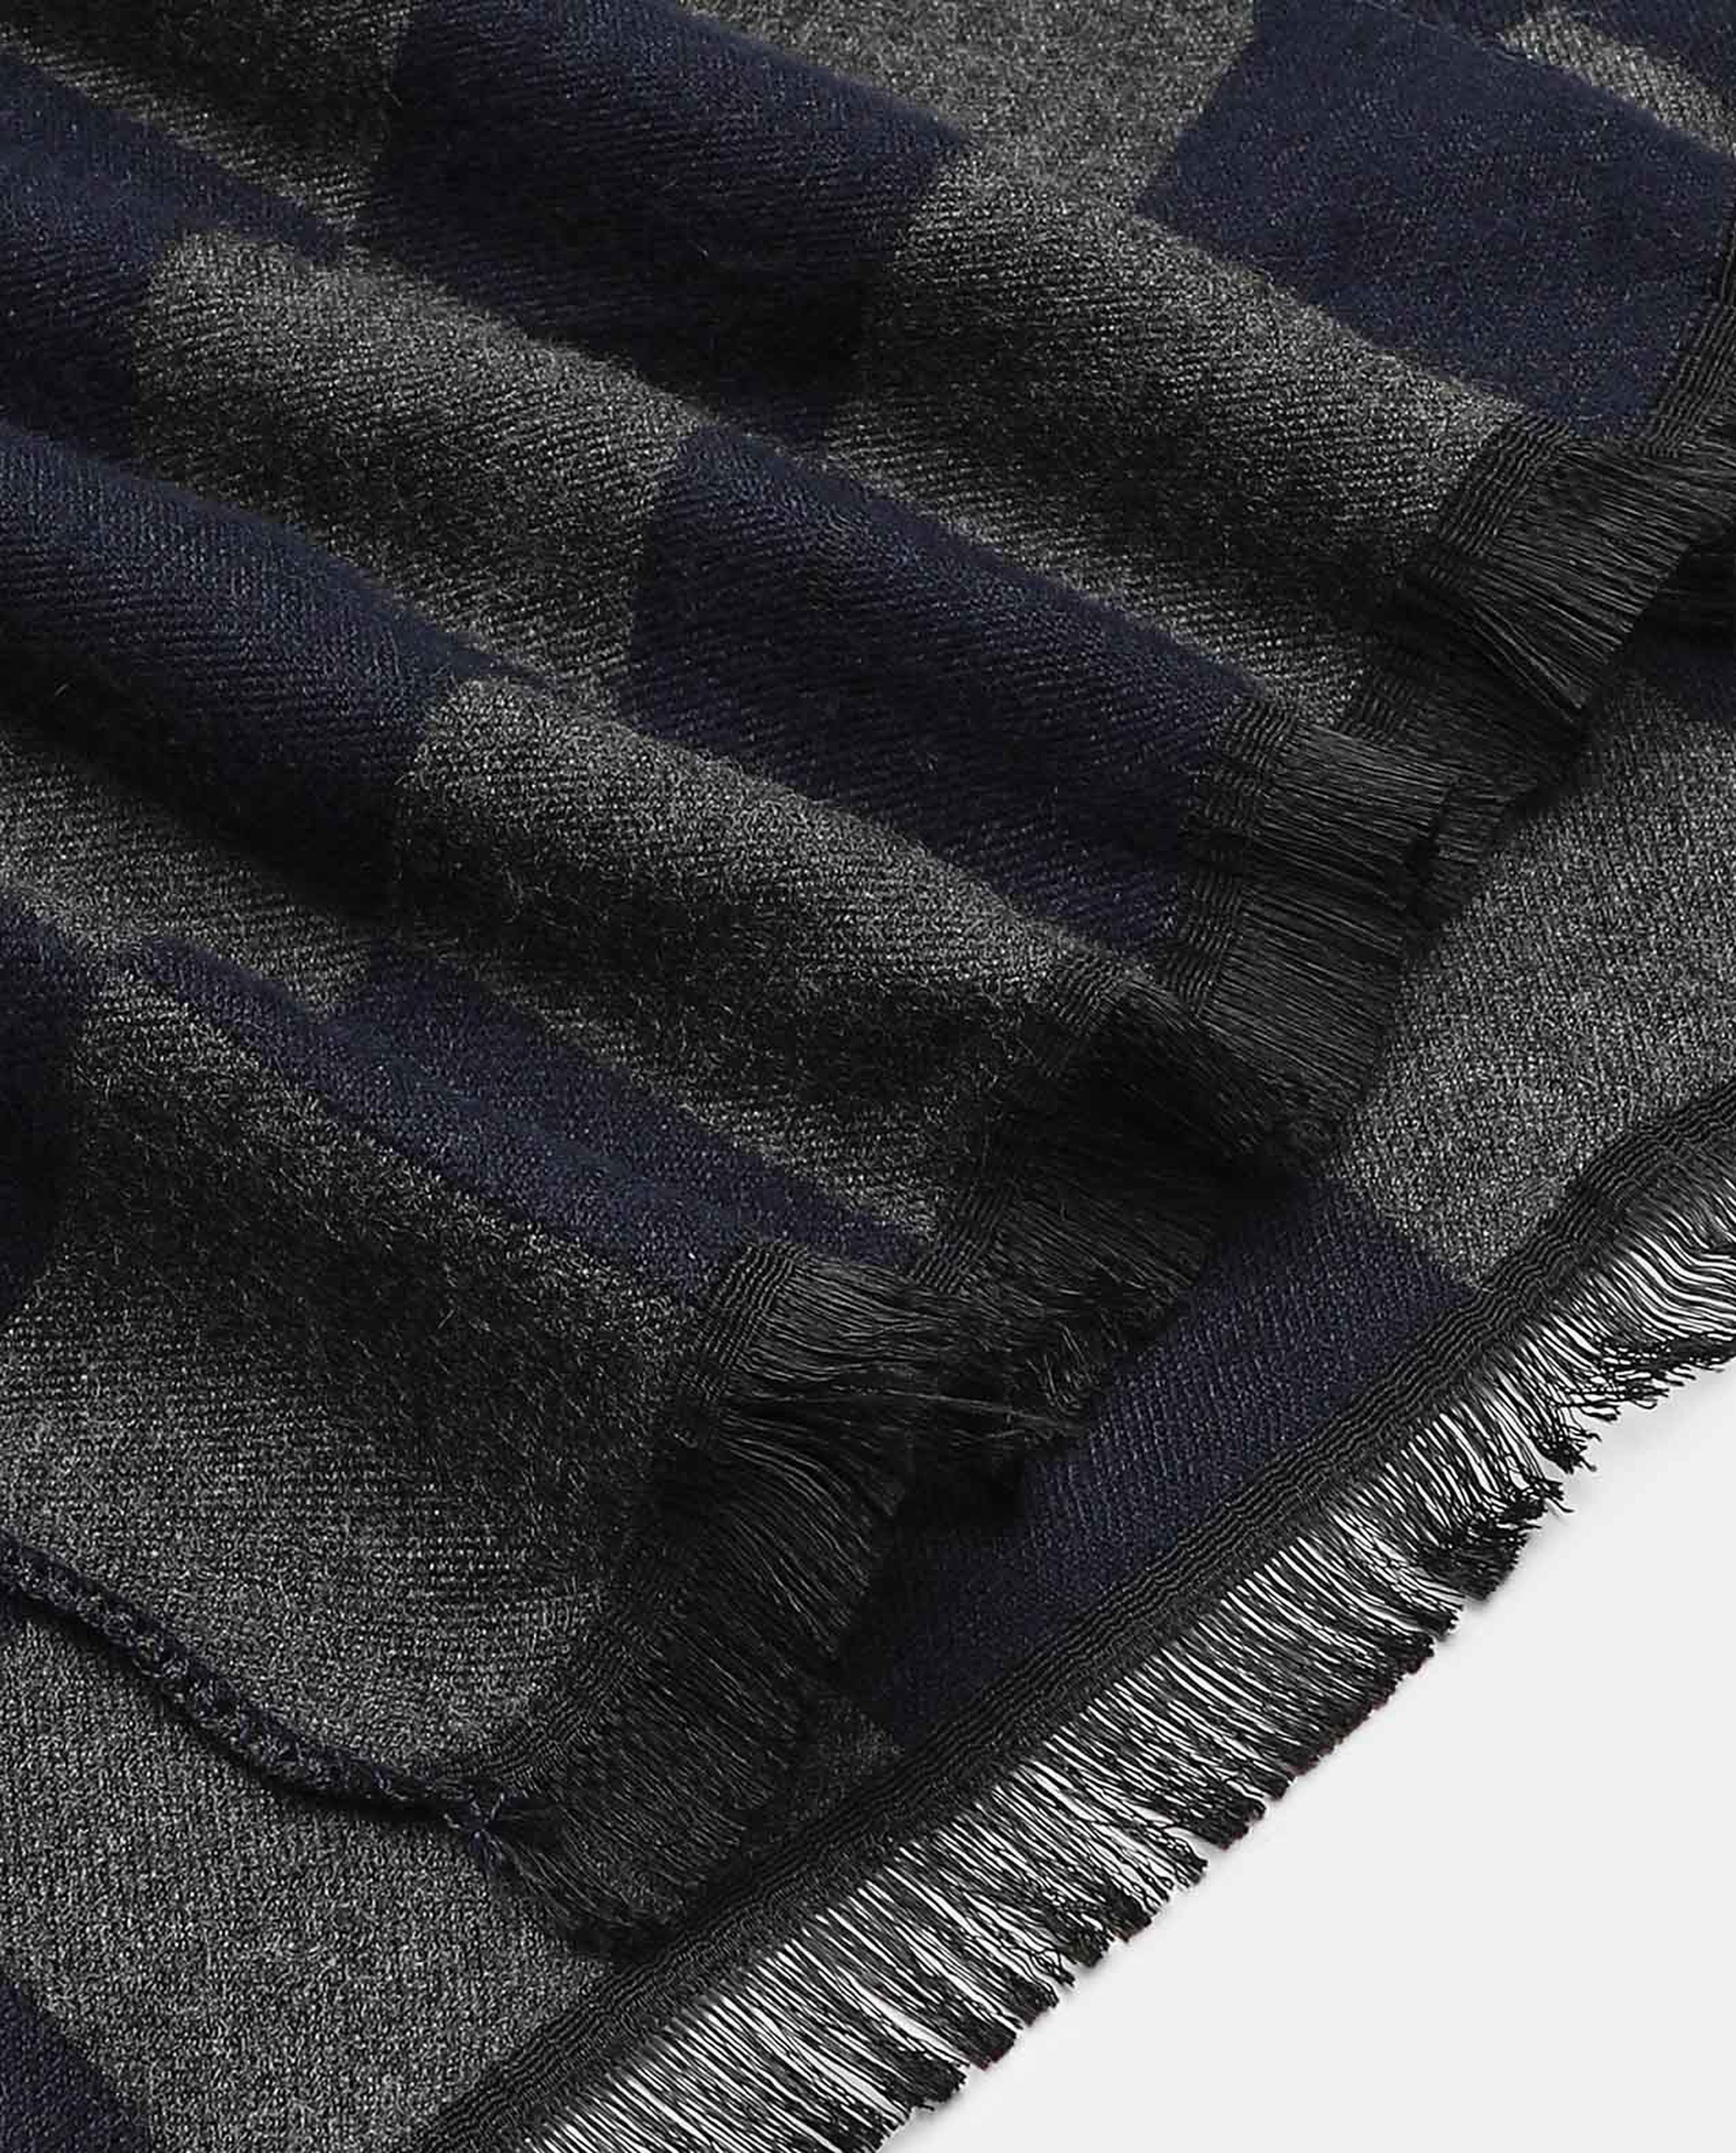 Checked Patterned Scarf